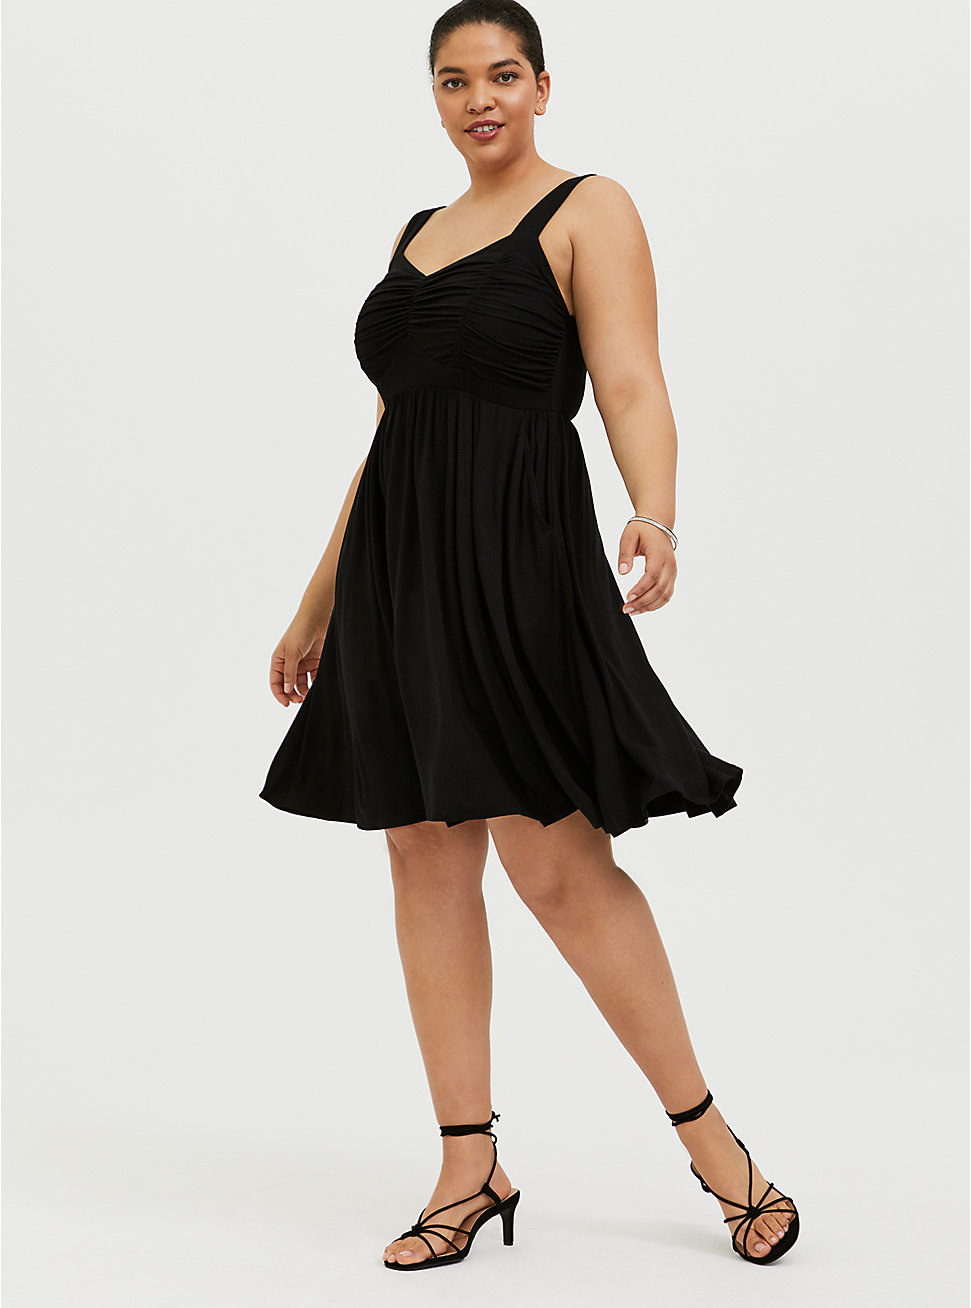 model in black knee-length dress with thick tank-top sleeves